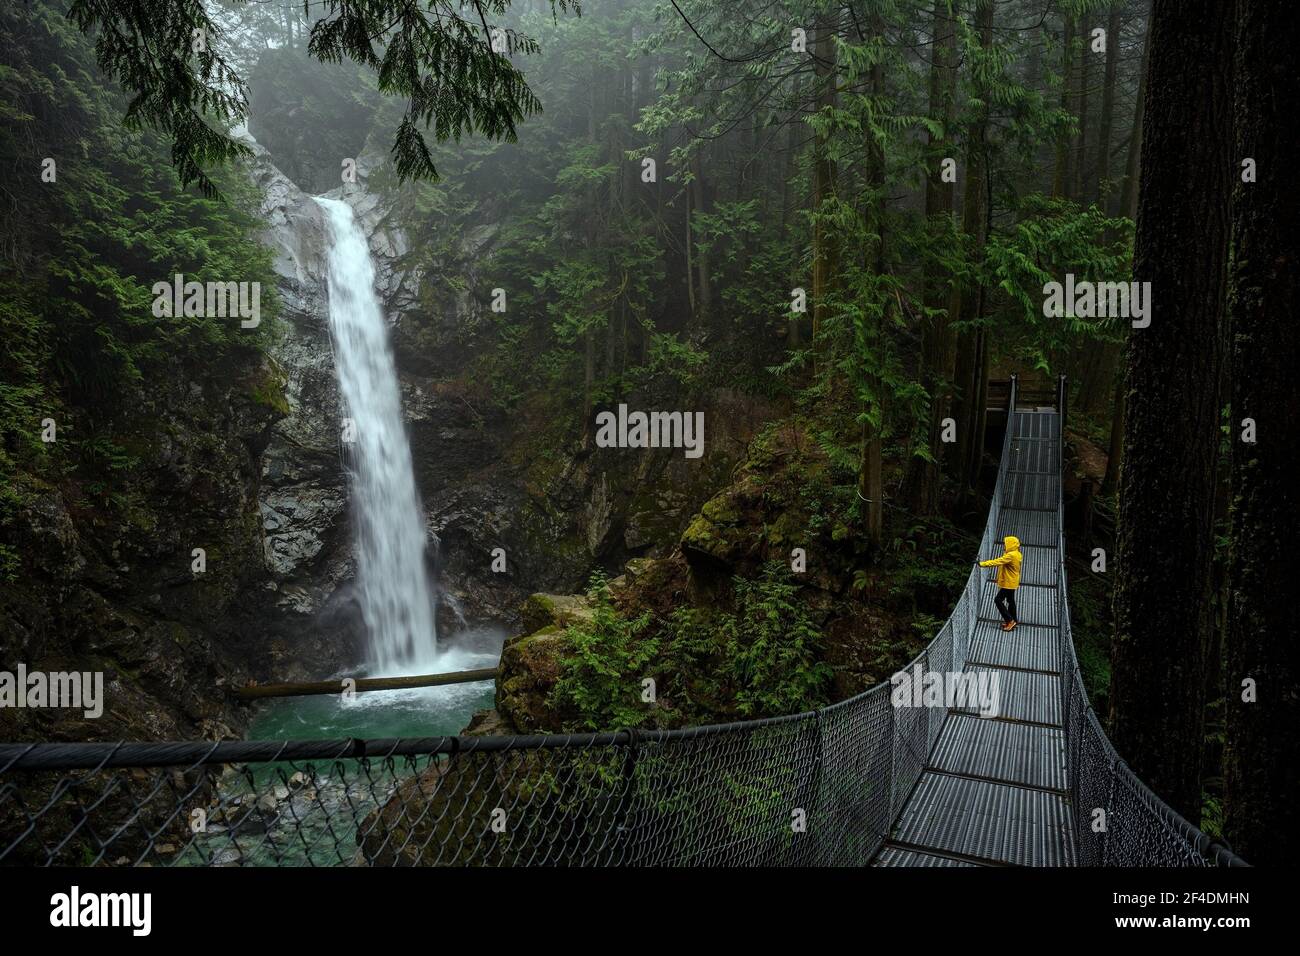 Woman in yellow rain jacket standing on a suspension bridge and watching the Cascade falls, in Cascade falls regional park, Deroche, British Columbia, Stock Photo